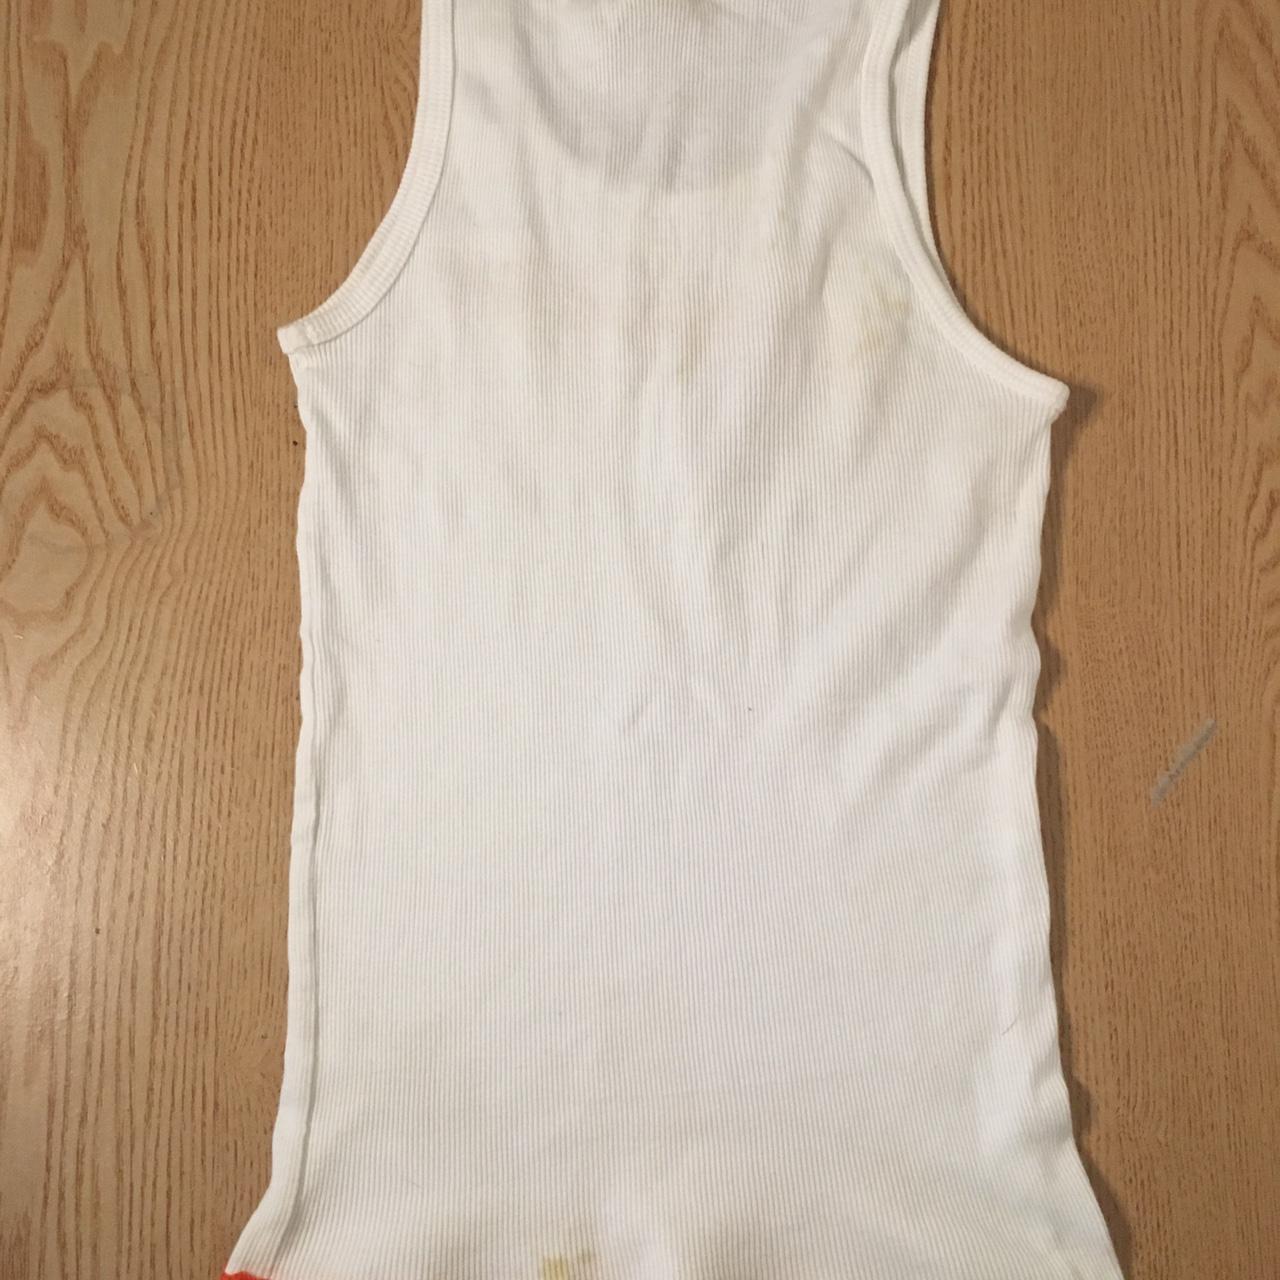 B12, Womens Hooters rare Vintage ribbed tank with